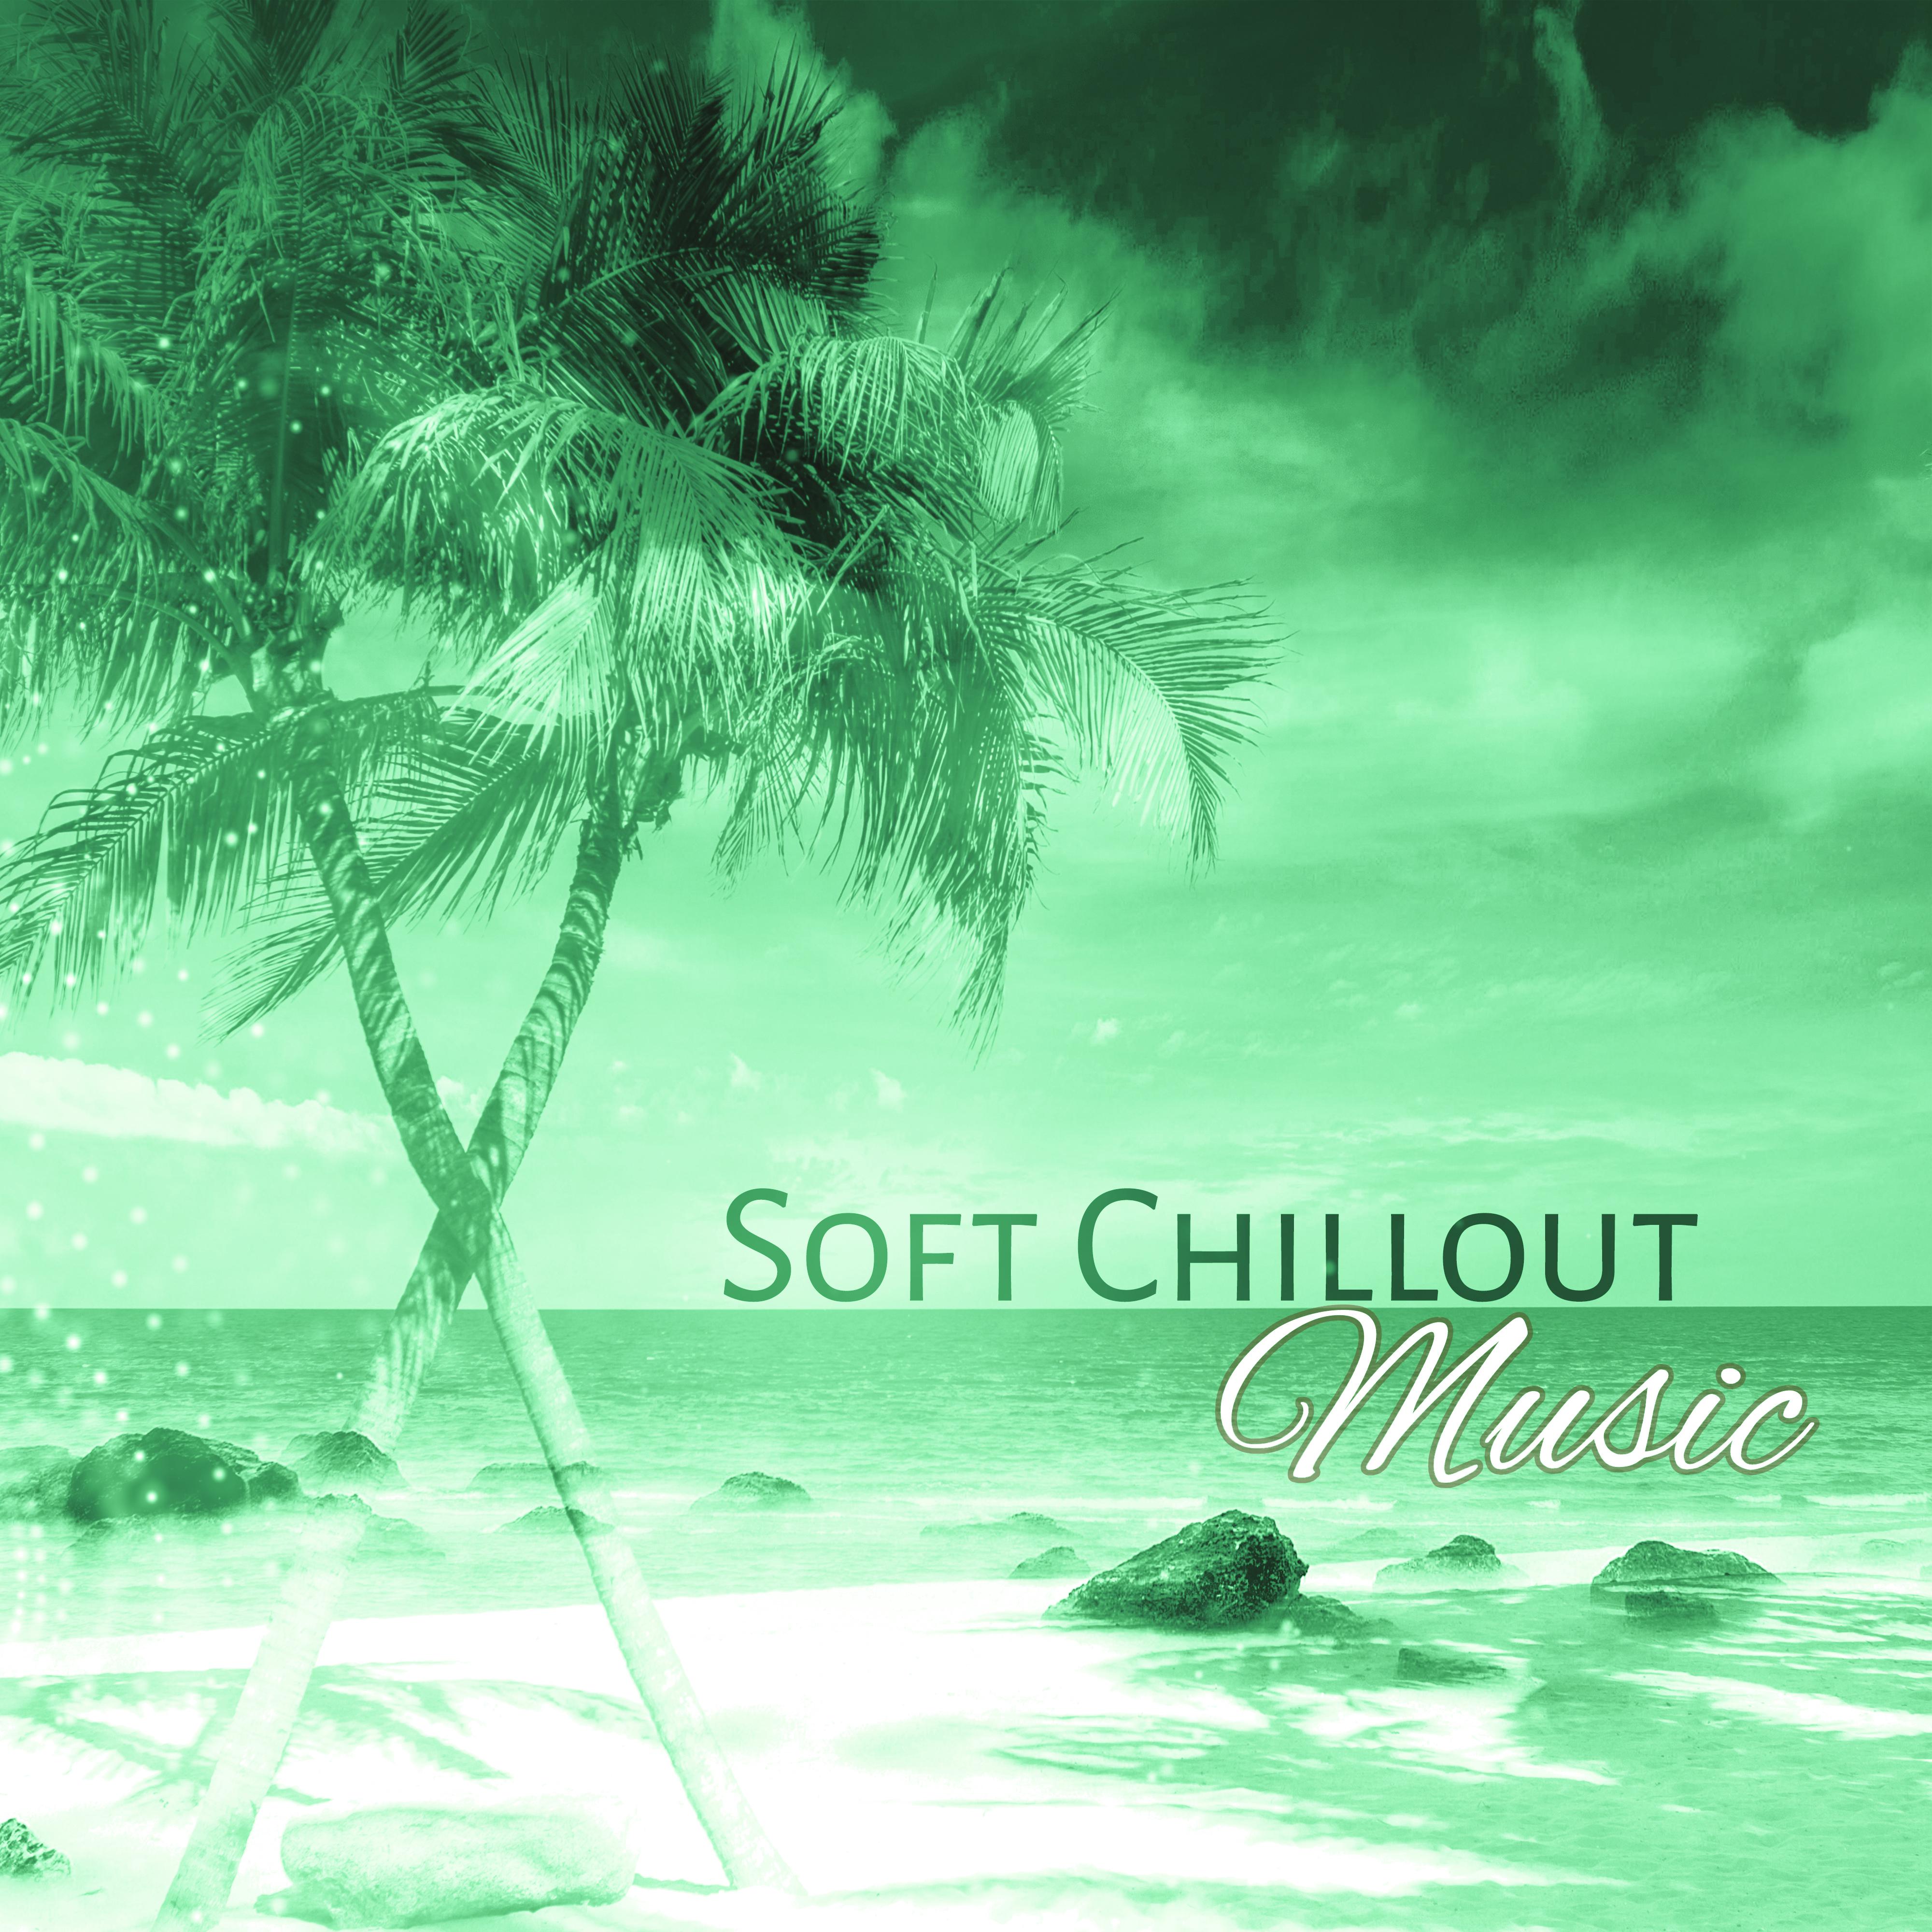 Soft Chillout Music – Gentle Sounds of Chillout, Relaxing Chill Out Music